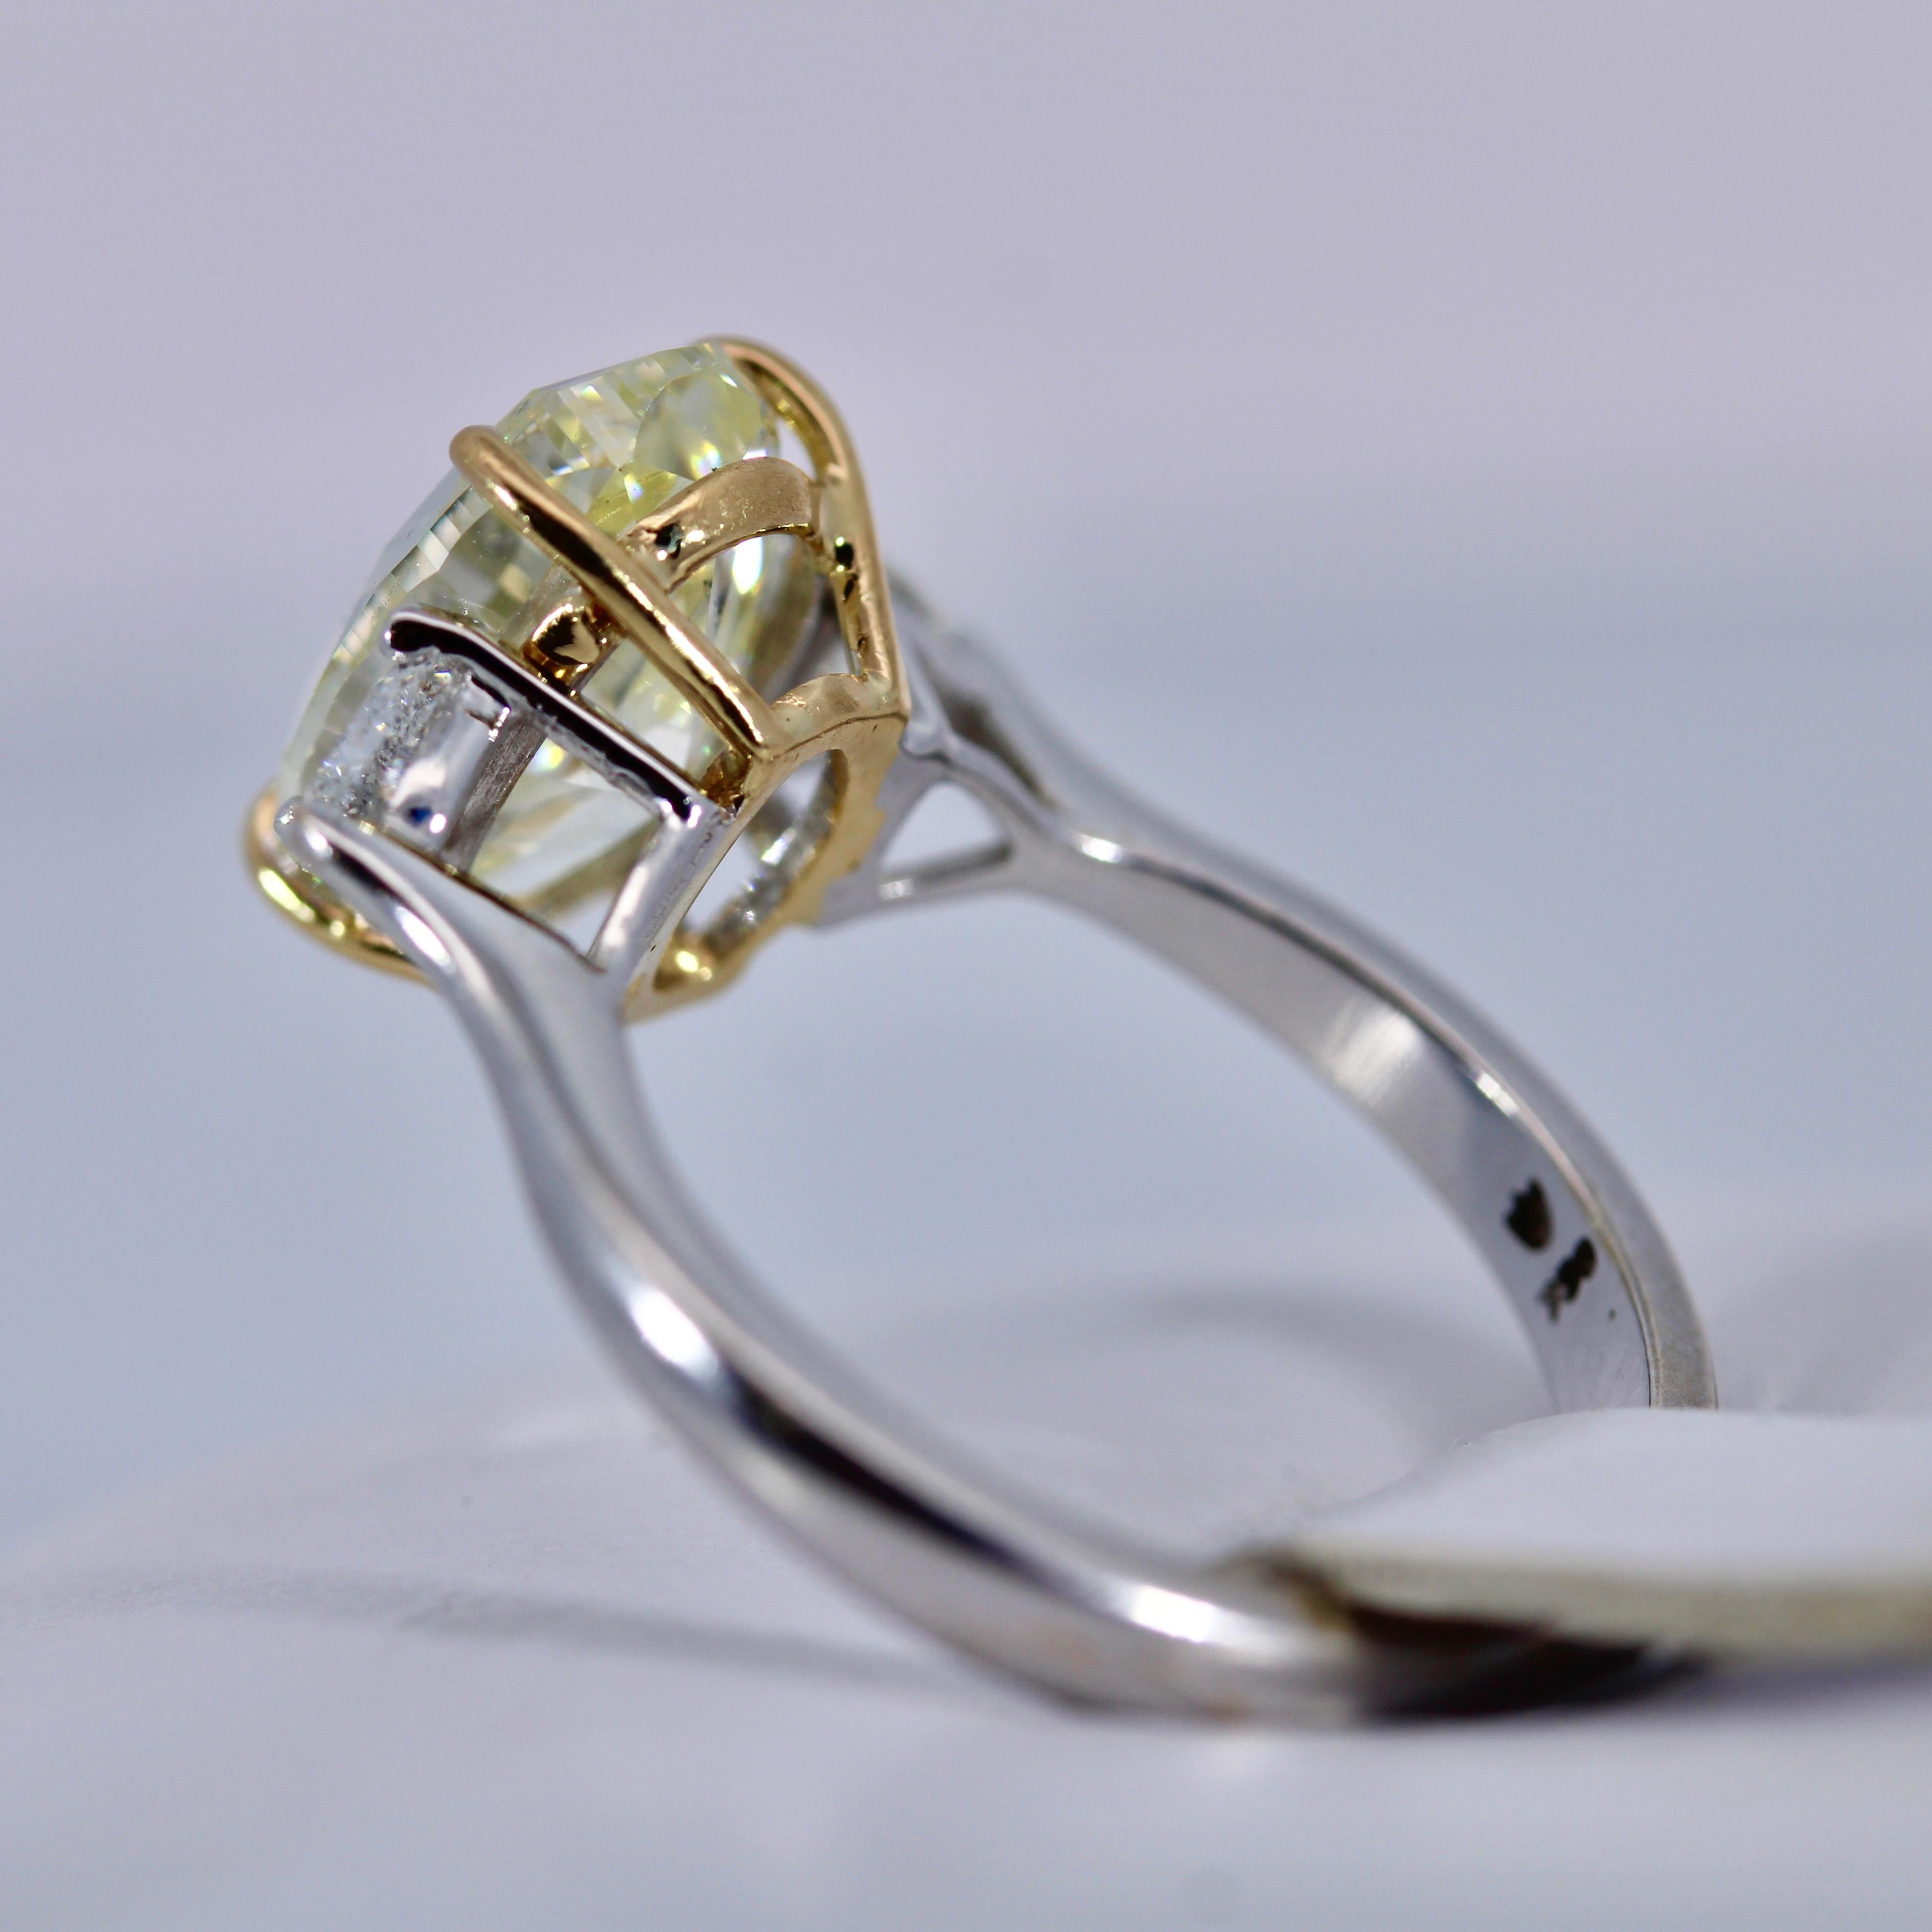 Contemporary GIA Certified 3.67 Carat Light Yellow Diamond 18K White Gold Solitaire Ring For Sale